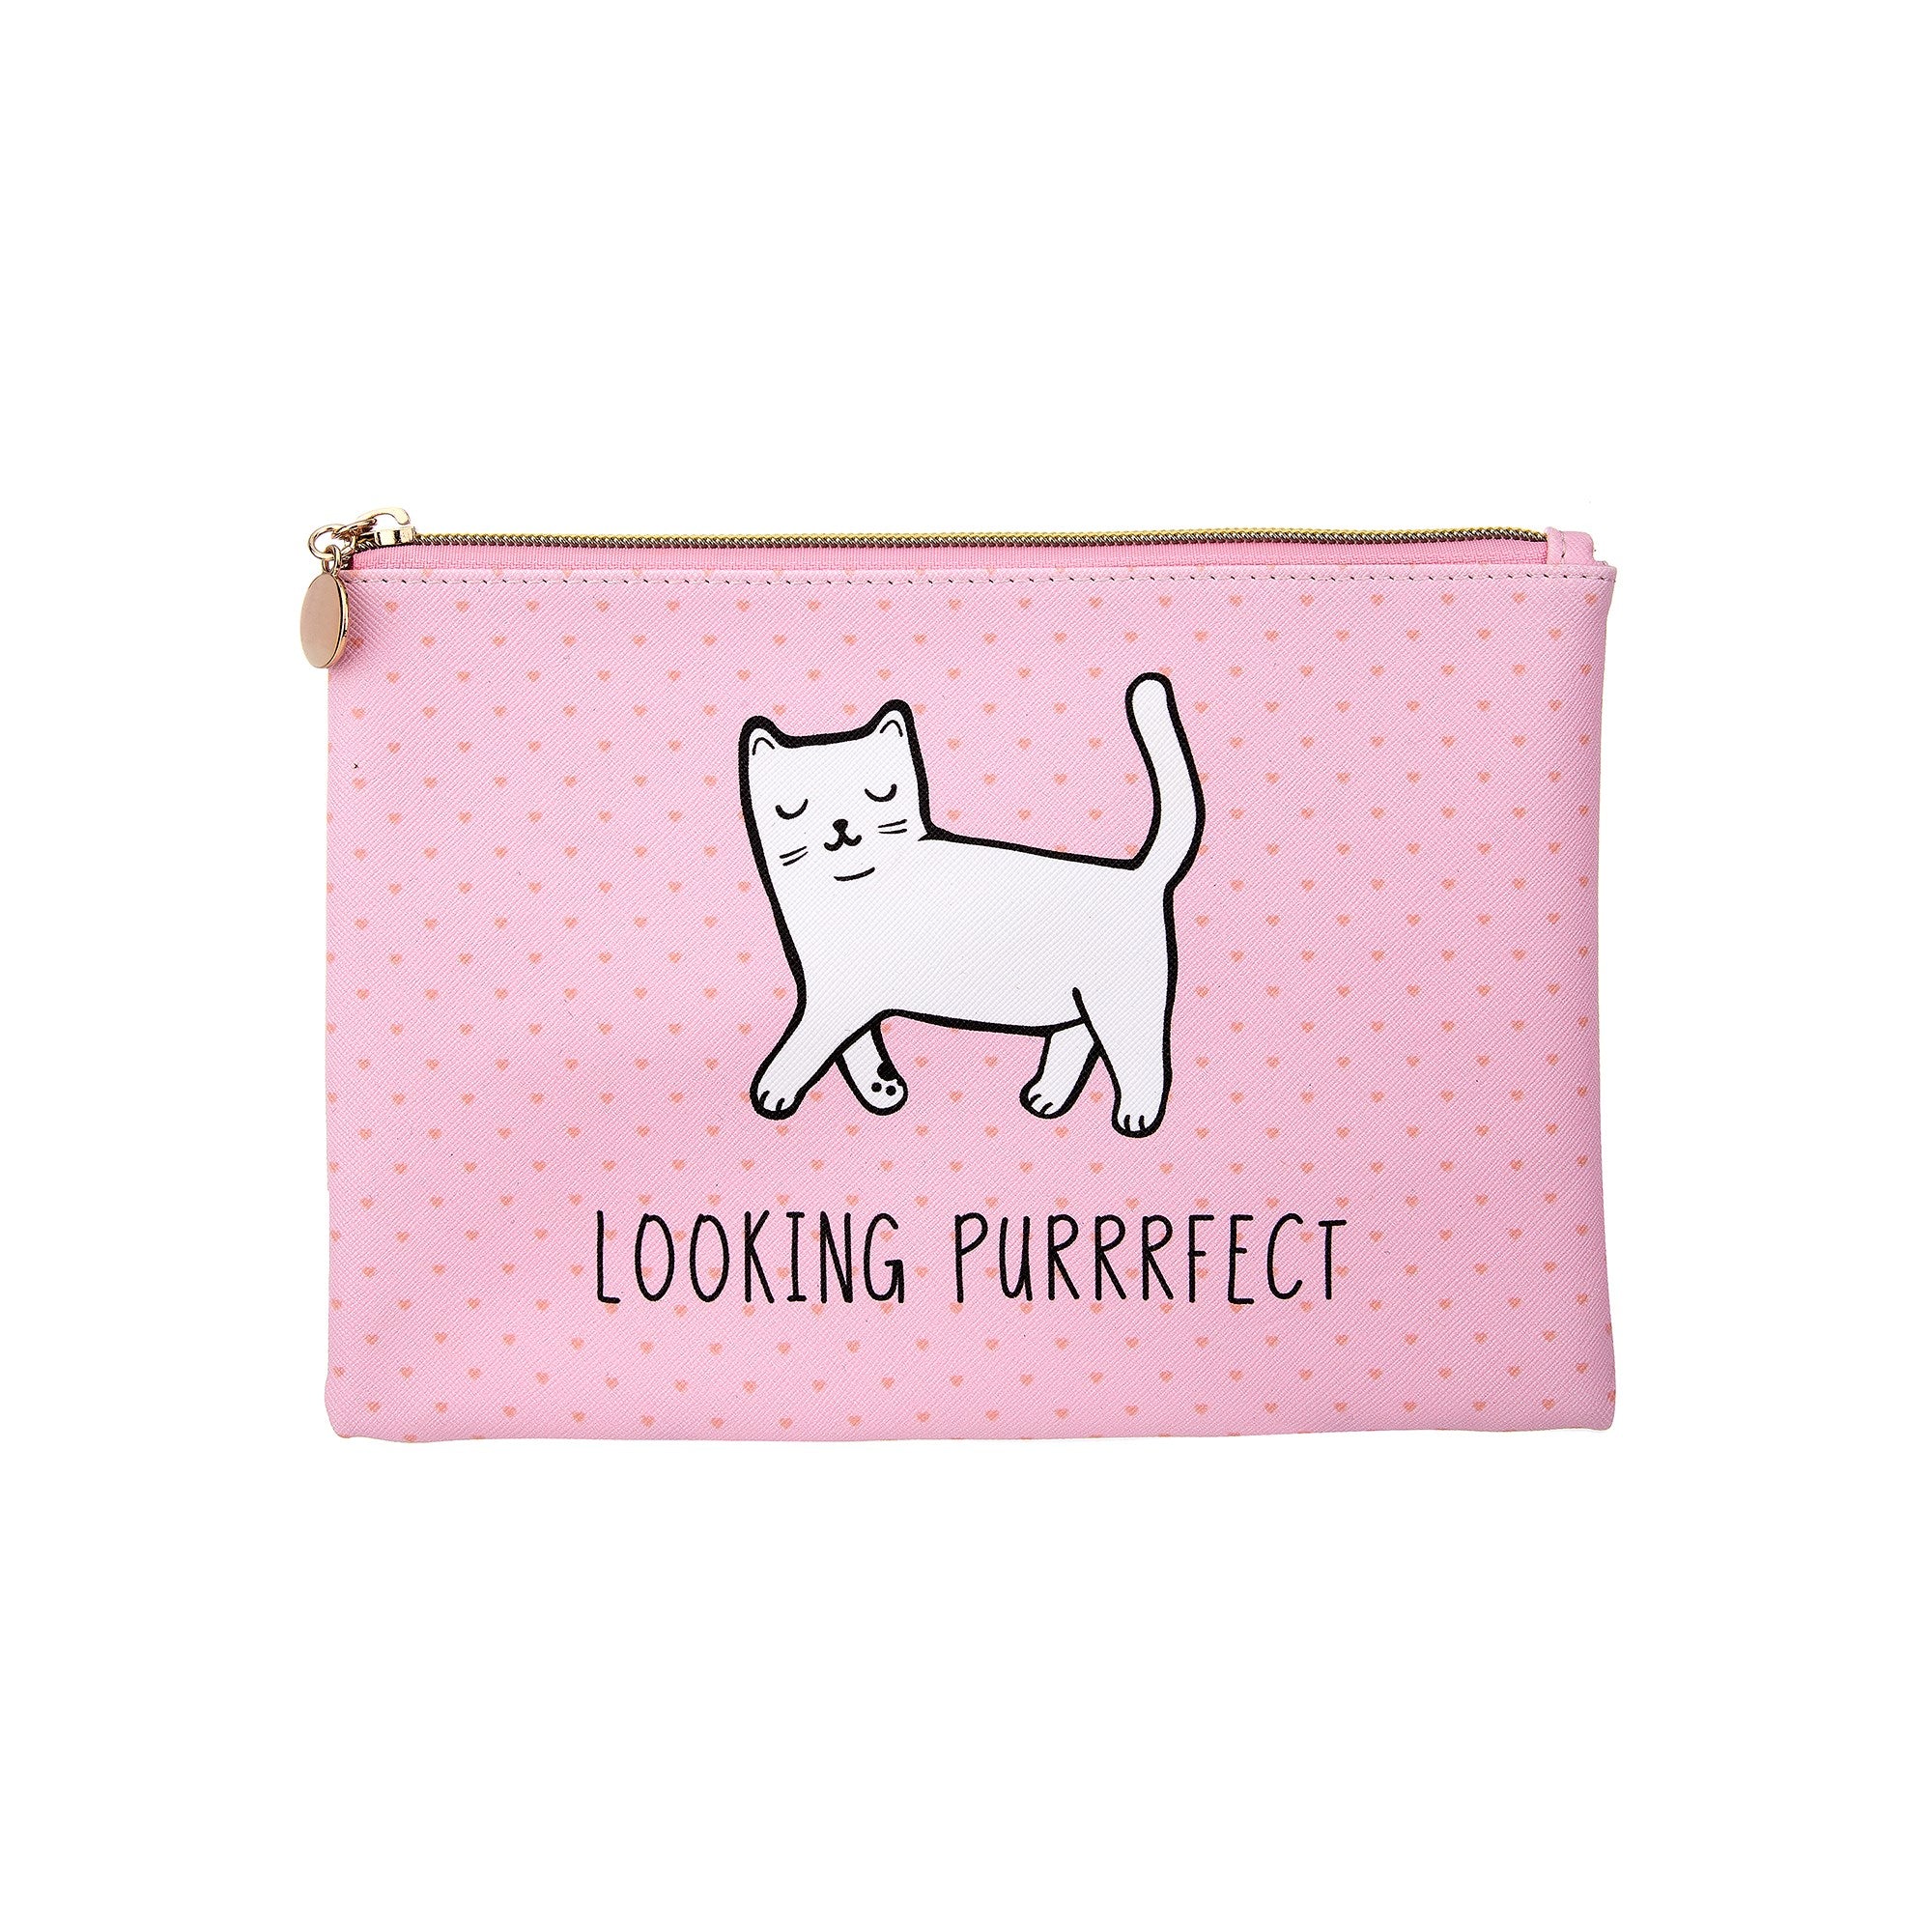 Cutie Cat Looking Purrrfect Pouch